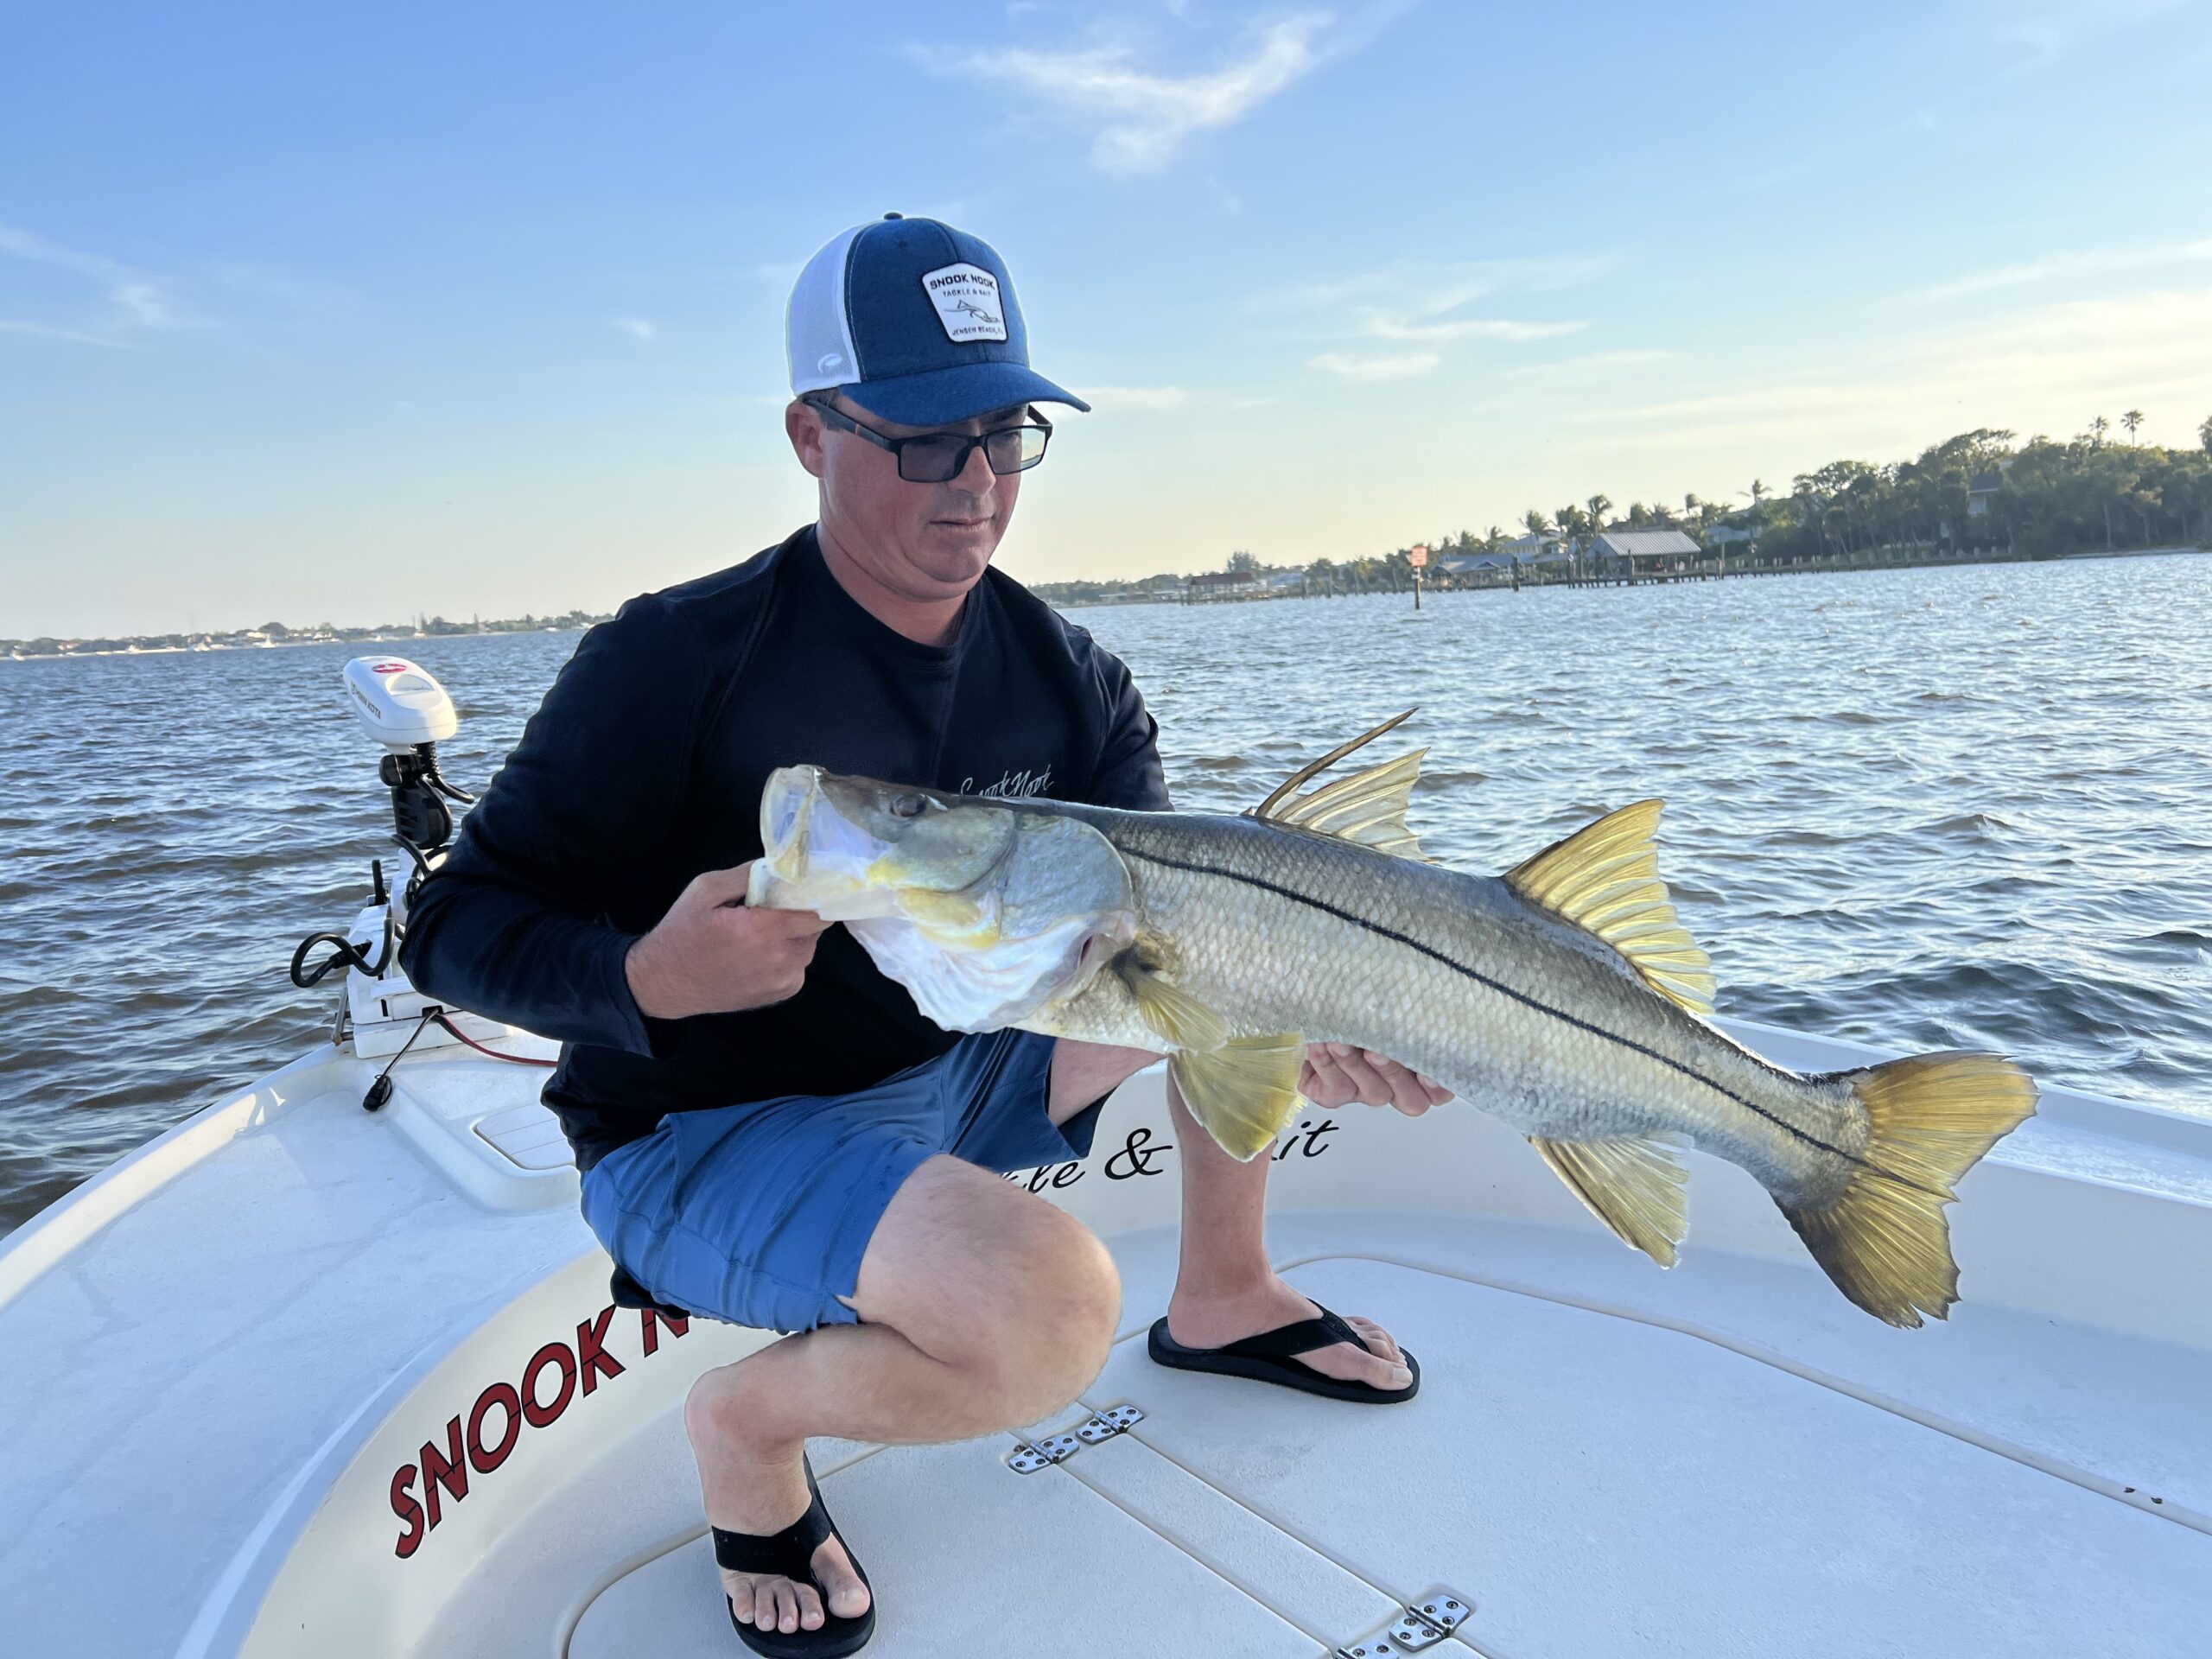 Half Day Inshore Fishing Charter - Snook Nook Charters